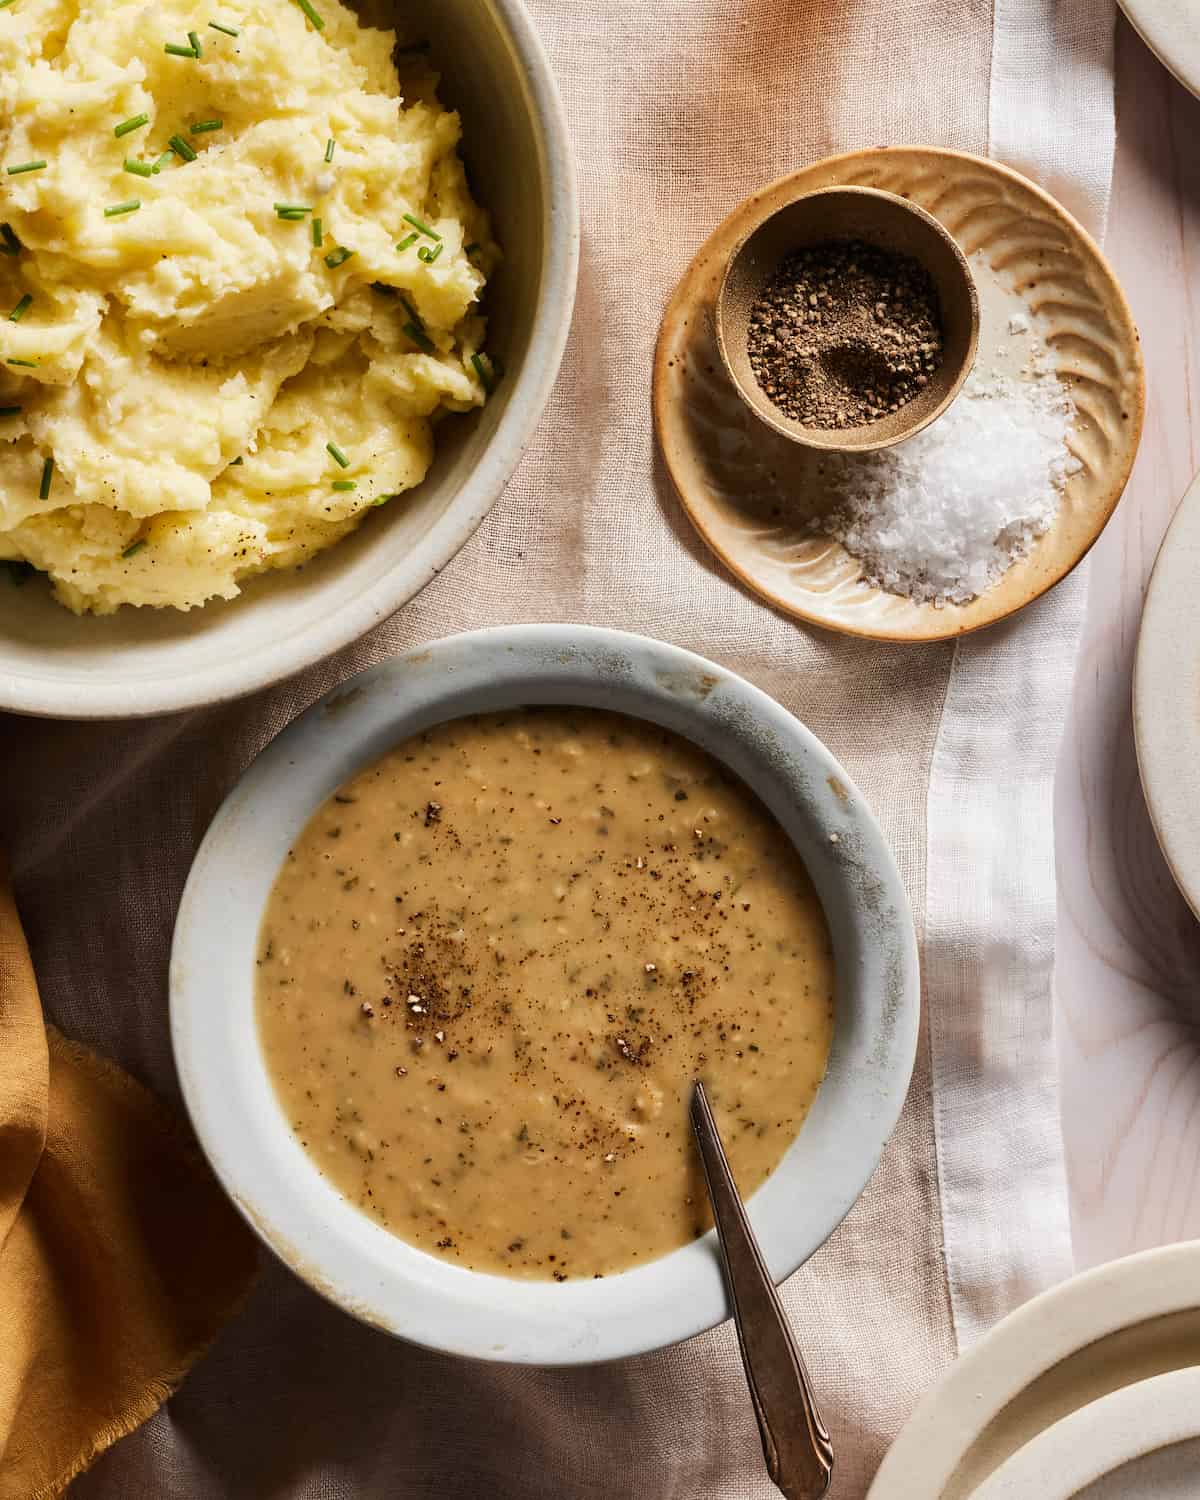 A grey bowl with turkey gravy garnished with freshly ground black pepper with a spoon in it, along with a bowl of mashed potatoes, and some kosher salt and black pepper on the side, all placed on a brown cloth on a wooden table.